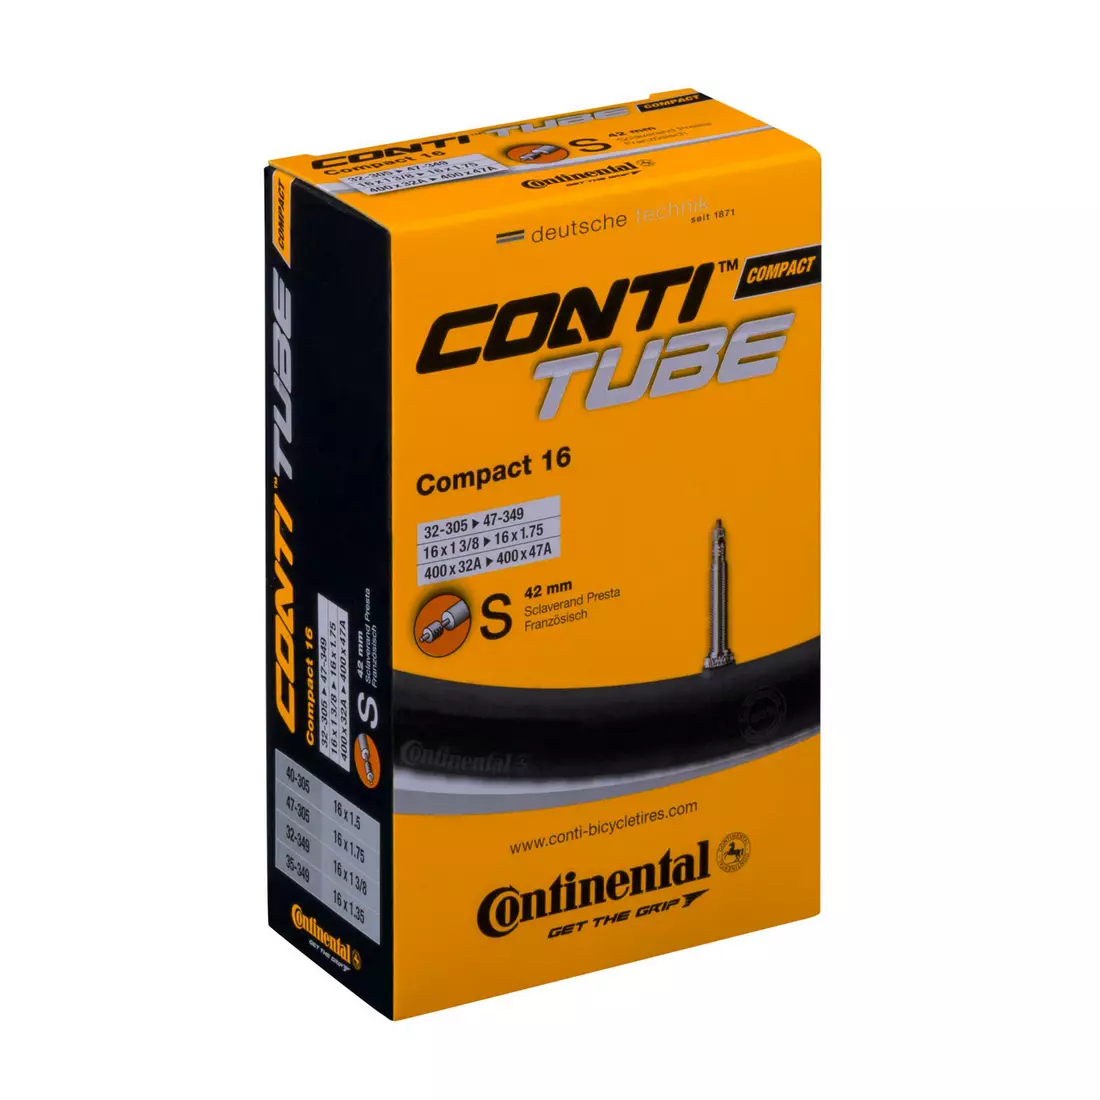 CONTINENTAL COMPACT 16/1,25 bicycle tube with a 42 mm Presta valve